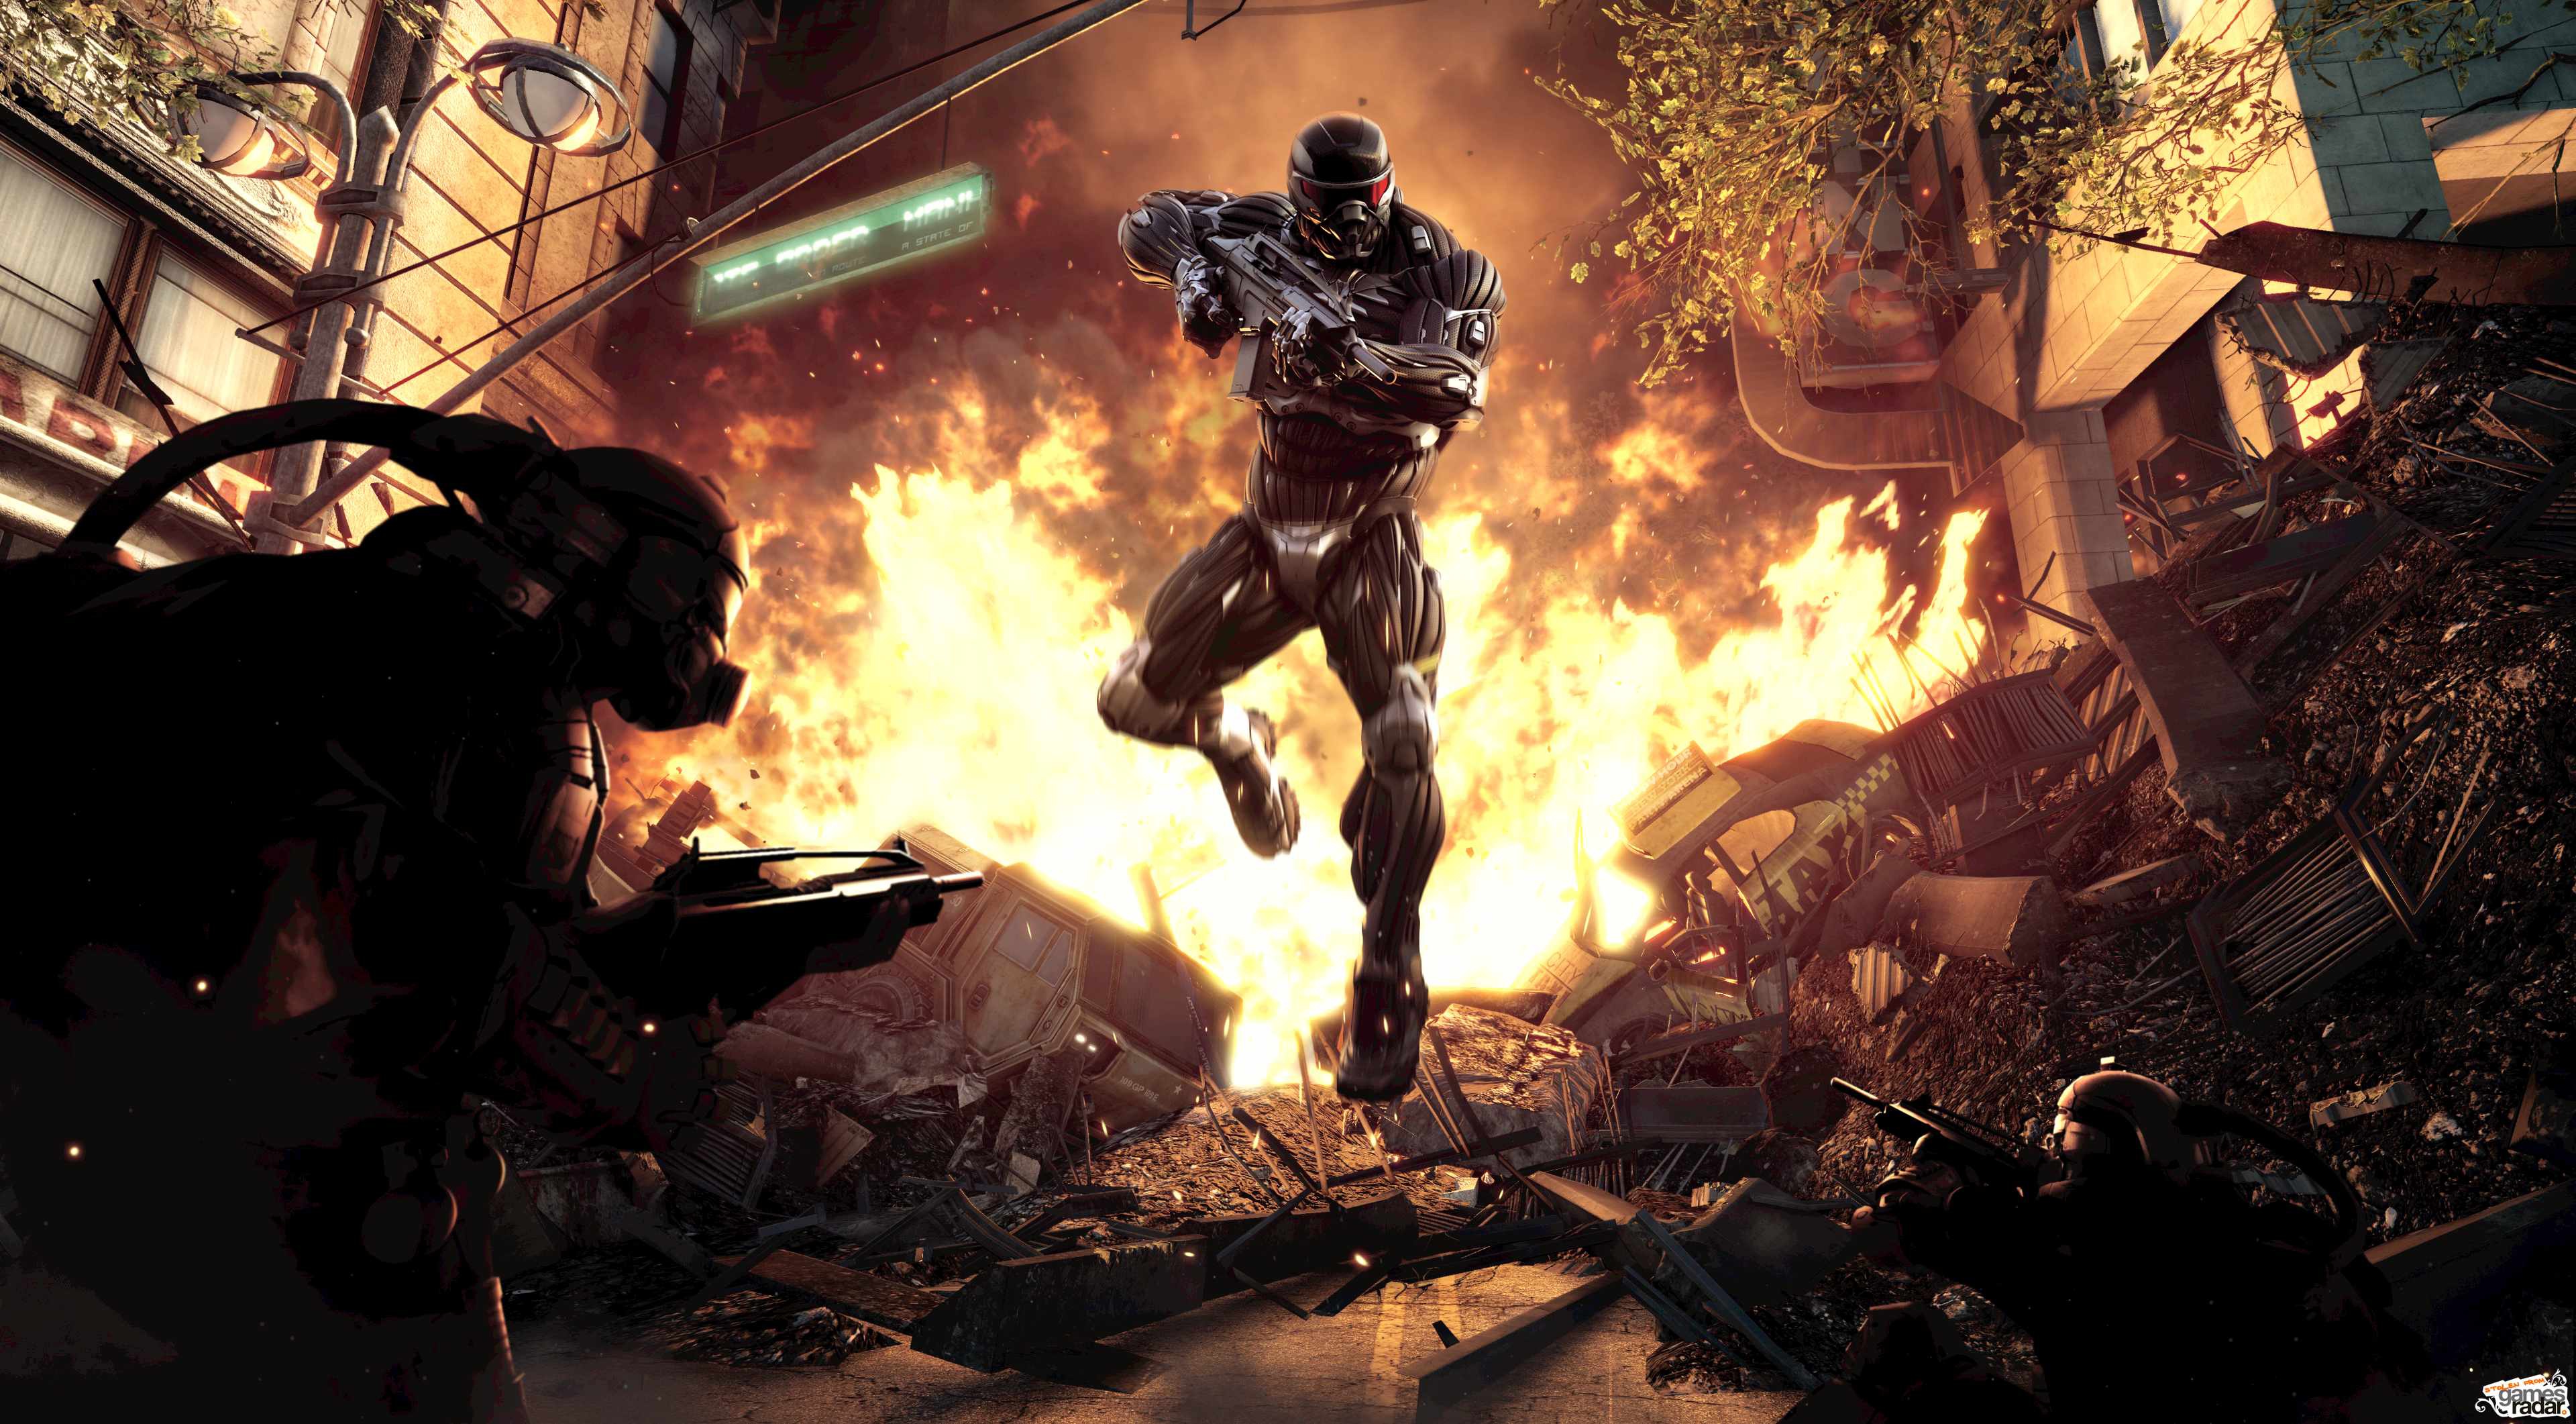 Crysis 2 desktop wallpaper with a video game theme.